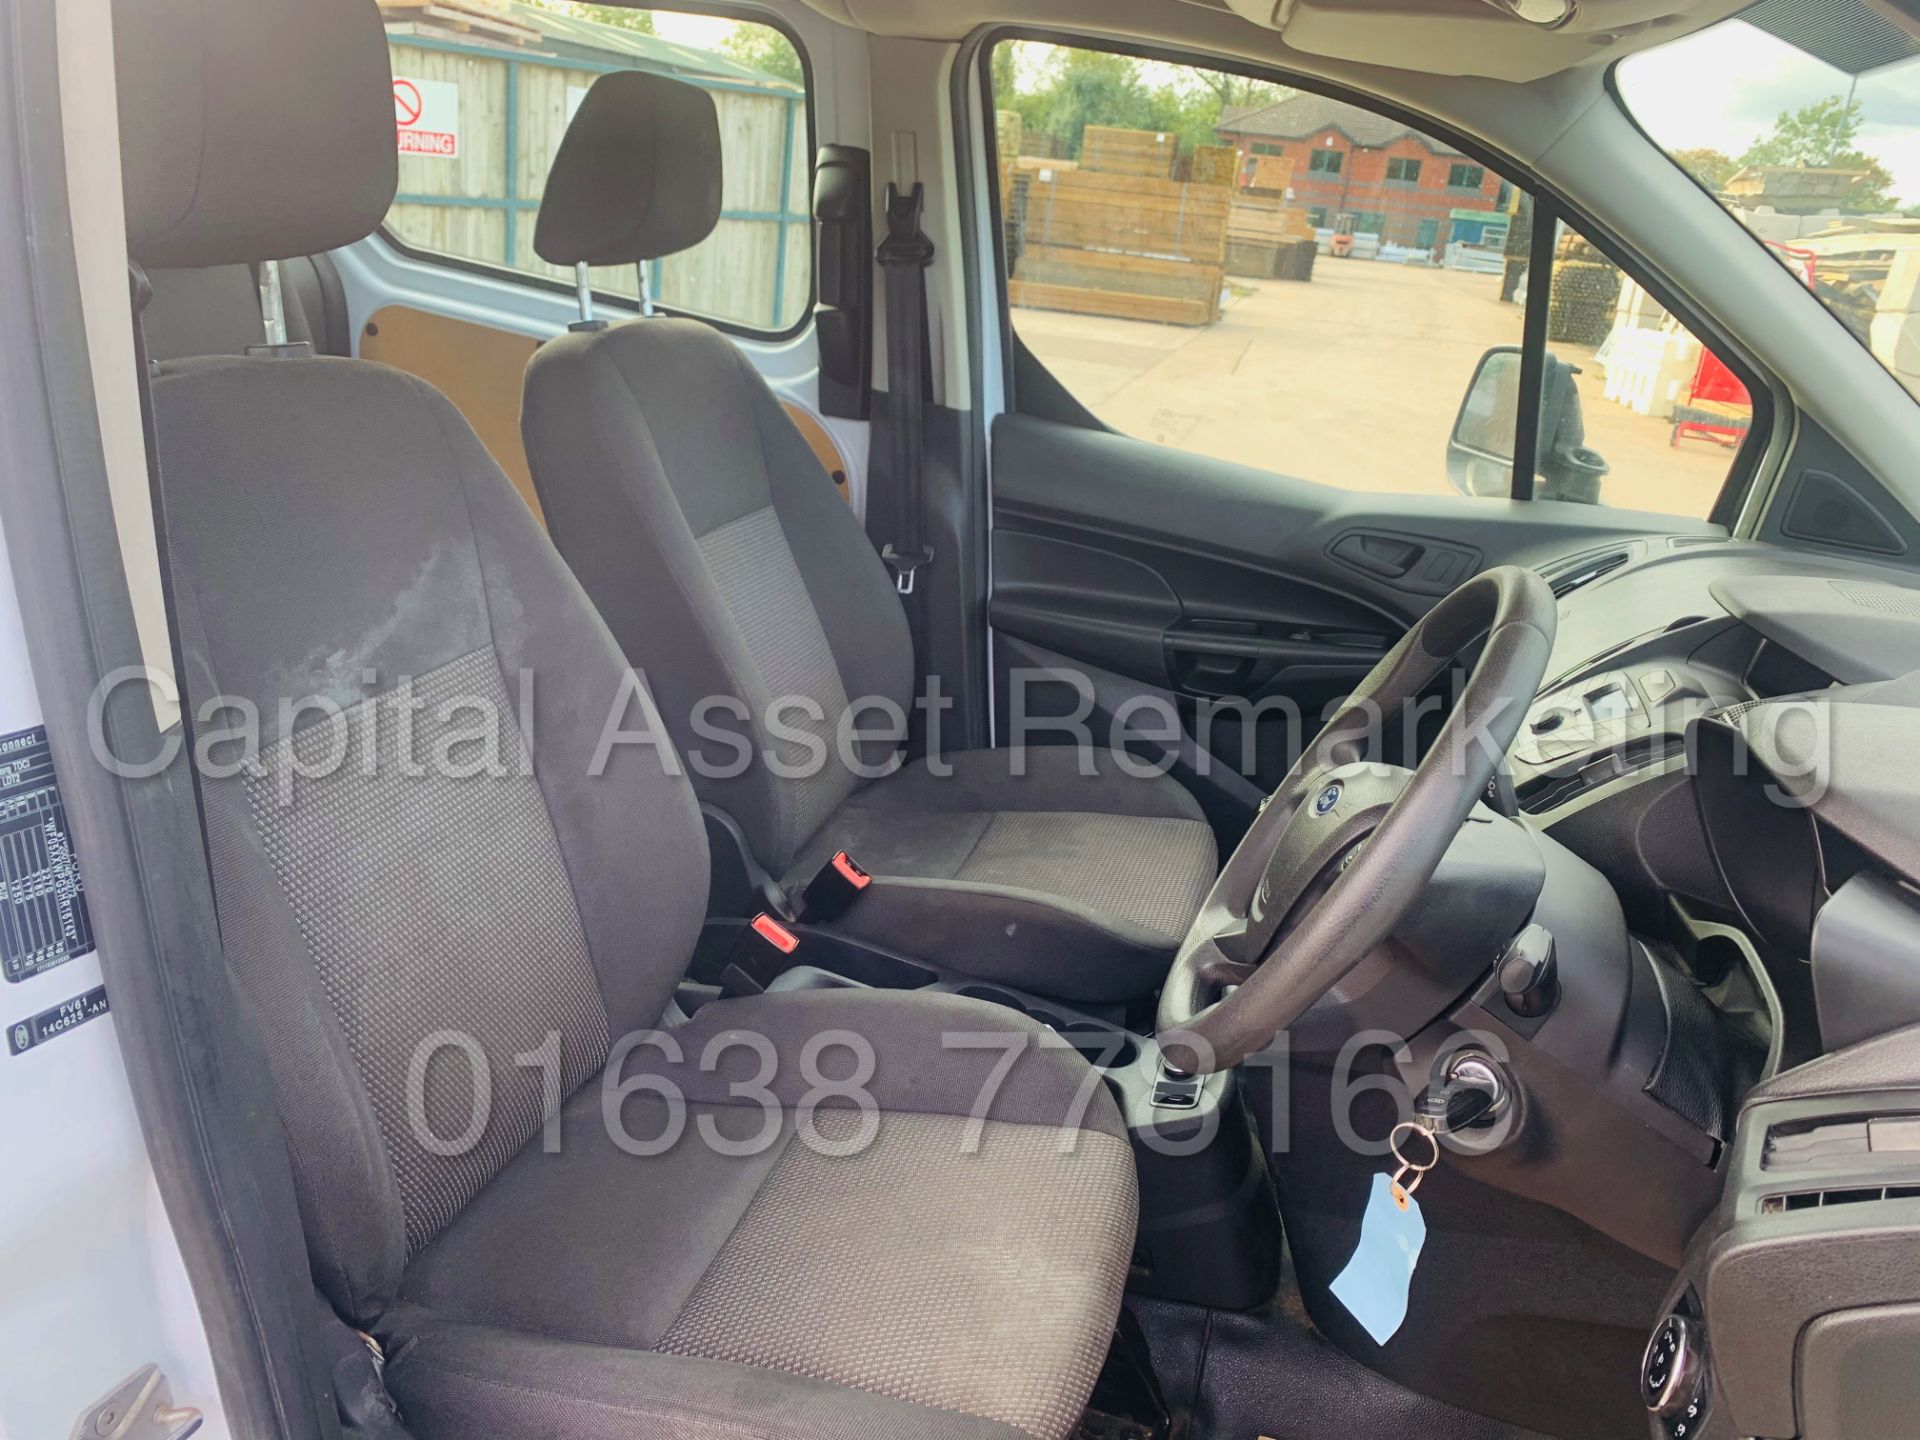 FORD TRANSIT CONNECT *LWB - 5 SEATER CREW VAN* (2018 - EURO 6) 1.5 TDCI *AIR CON* (1 OWNER) - Image 28 of 40